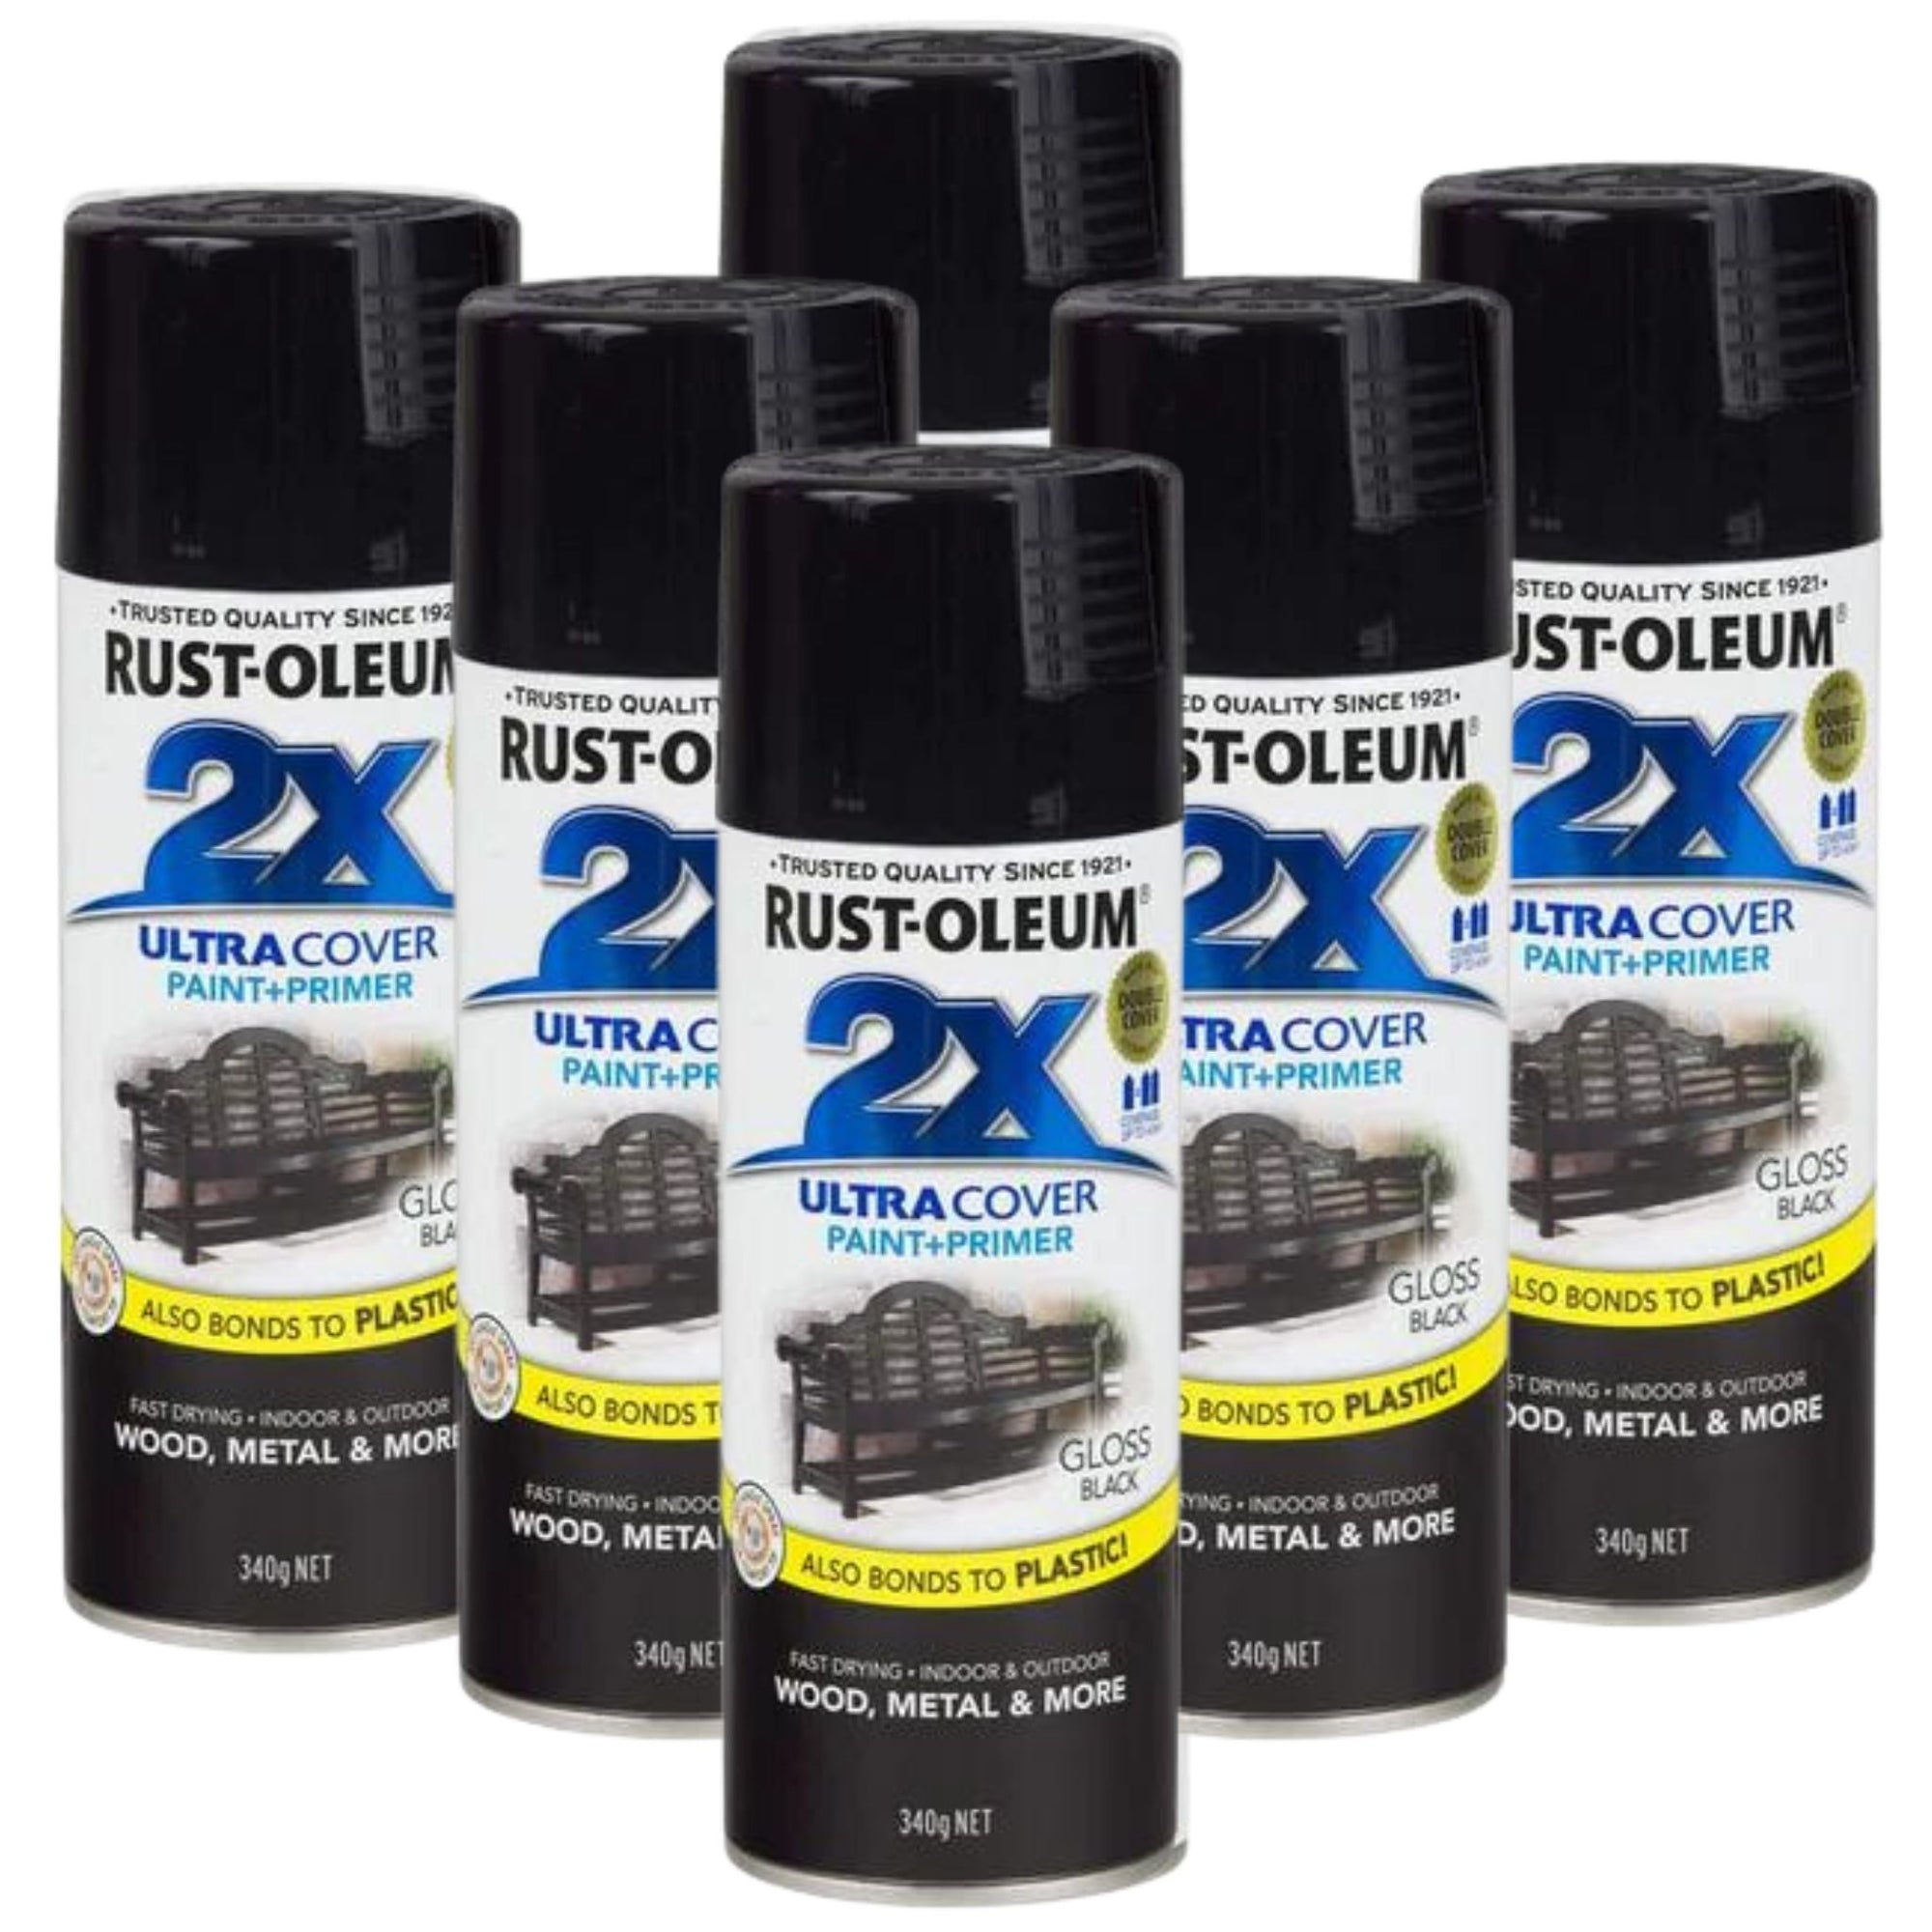 6 Cans | RUST-OLEUM 2X Gloss Paint & Primer Spray Paint 340g Gloss Black 276315 - South East Clearance Centre